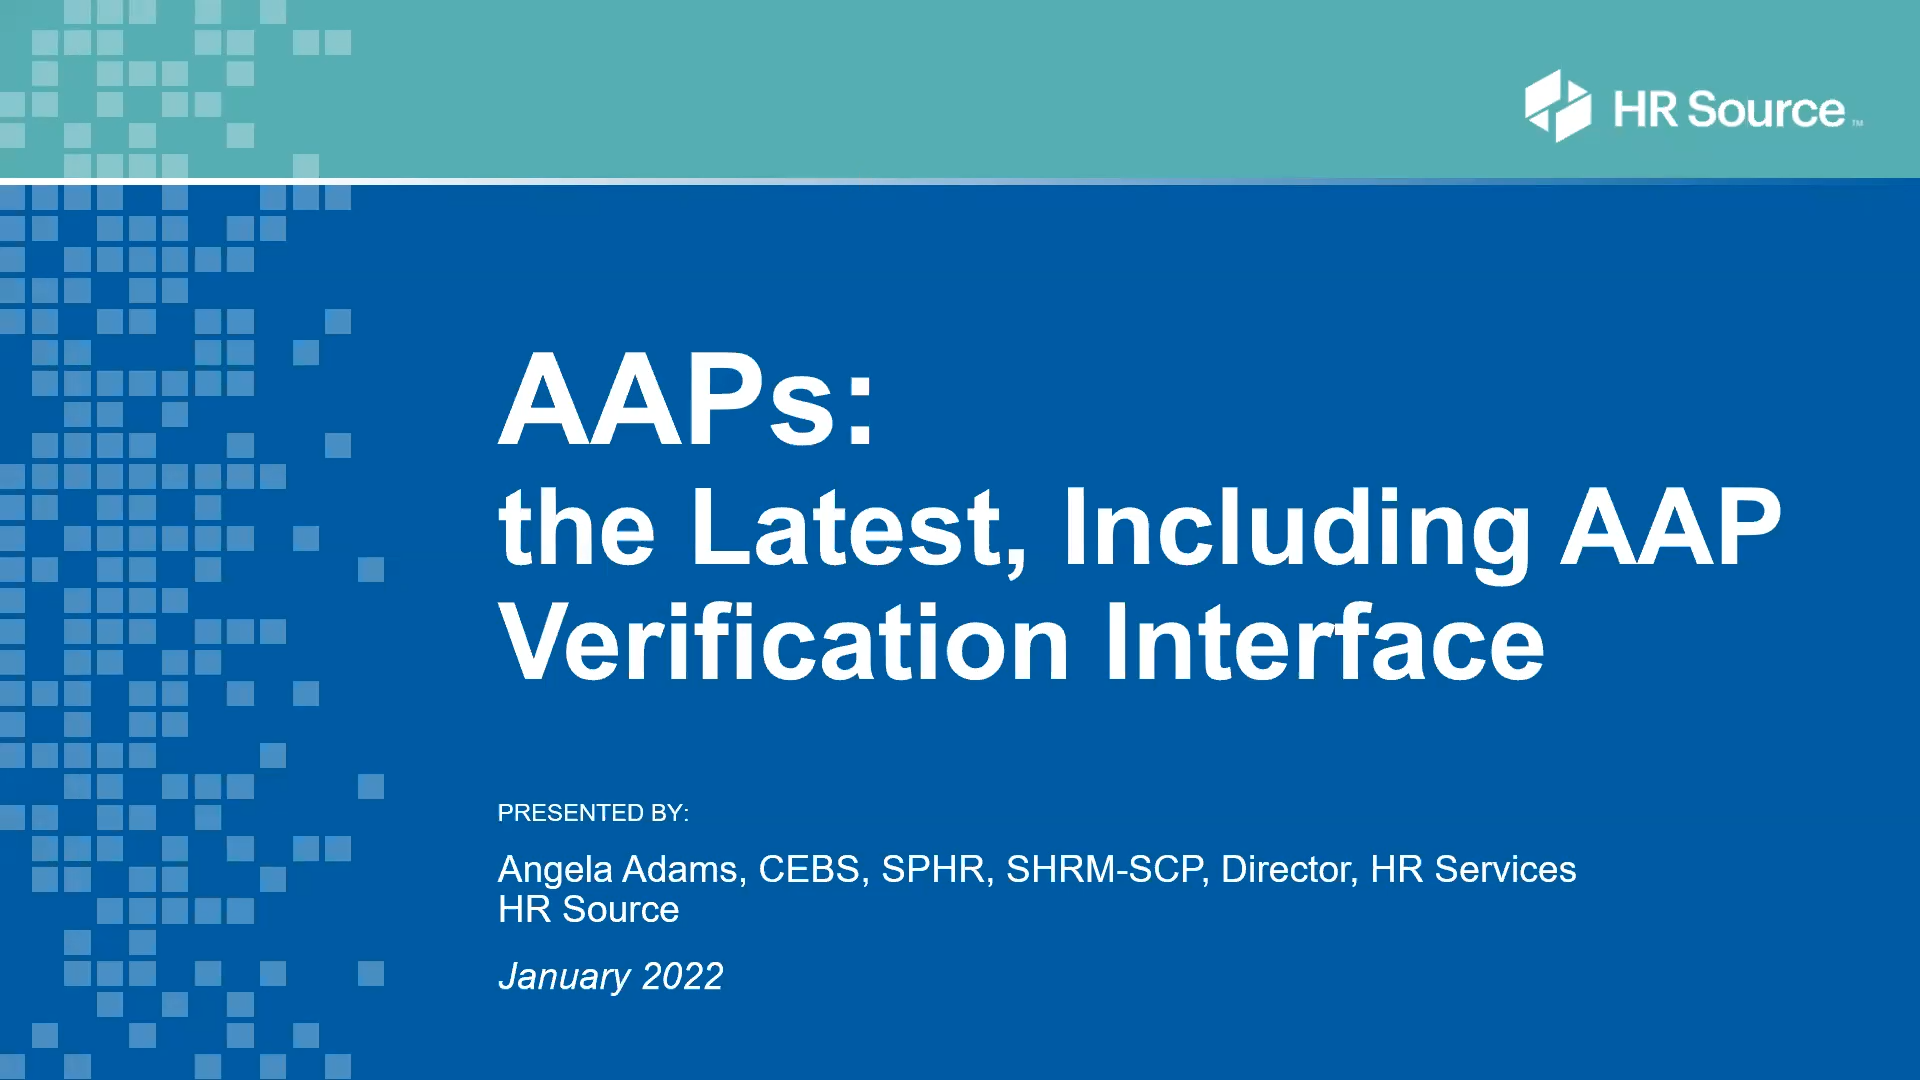 AAPs: the Latest, Including AAP Verification Interface